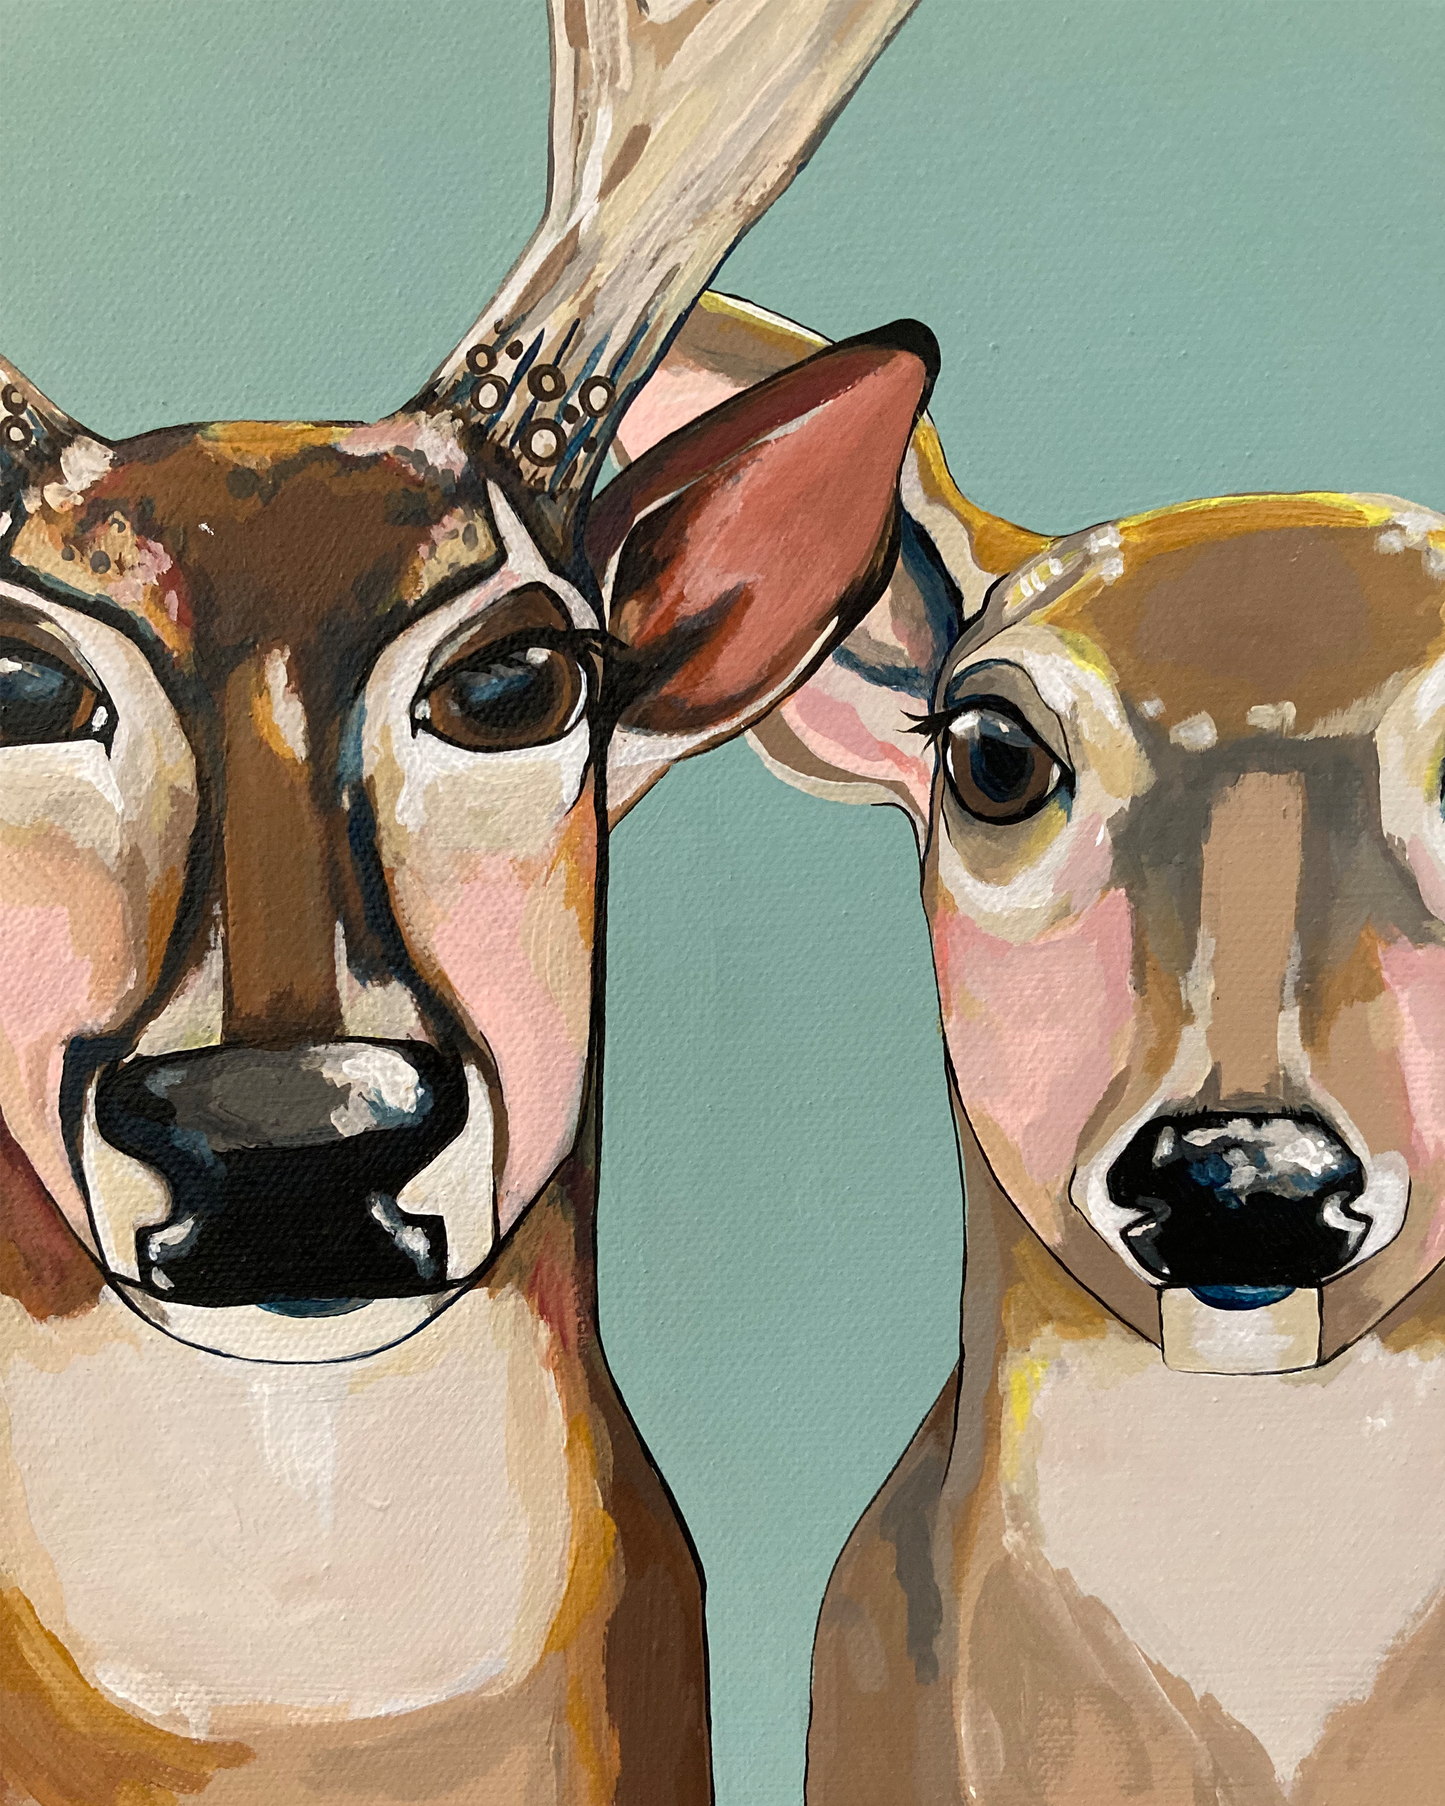 The Whitetail Family Original Painting